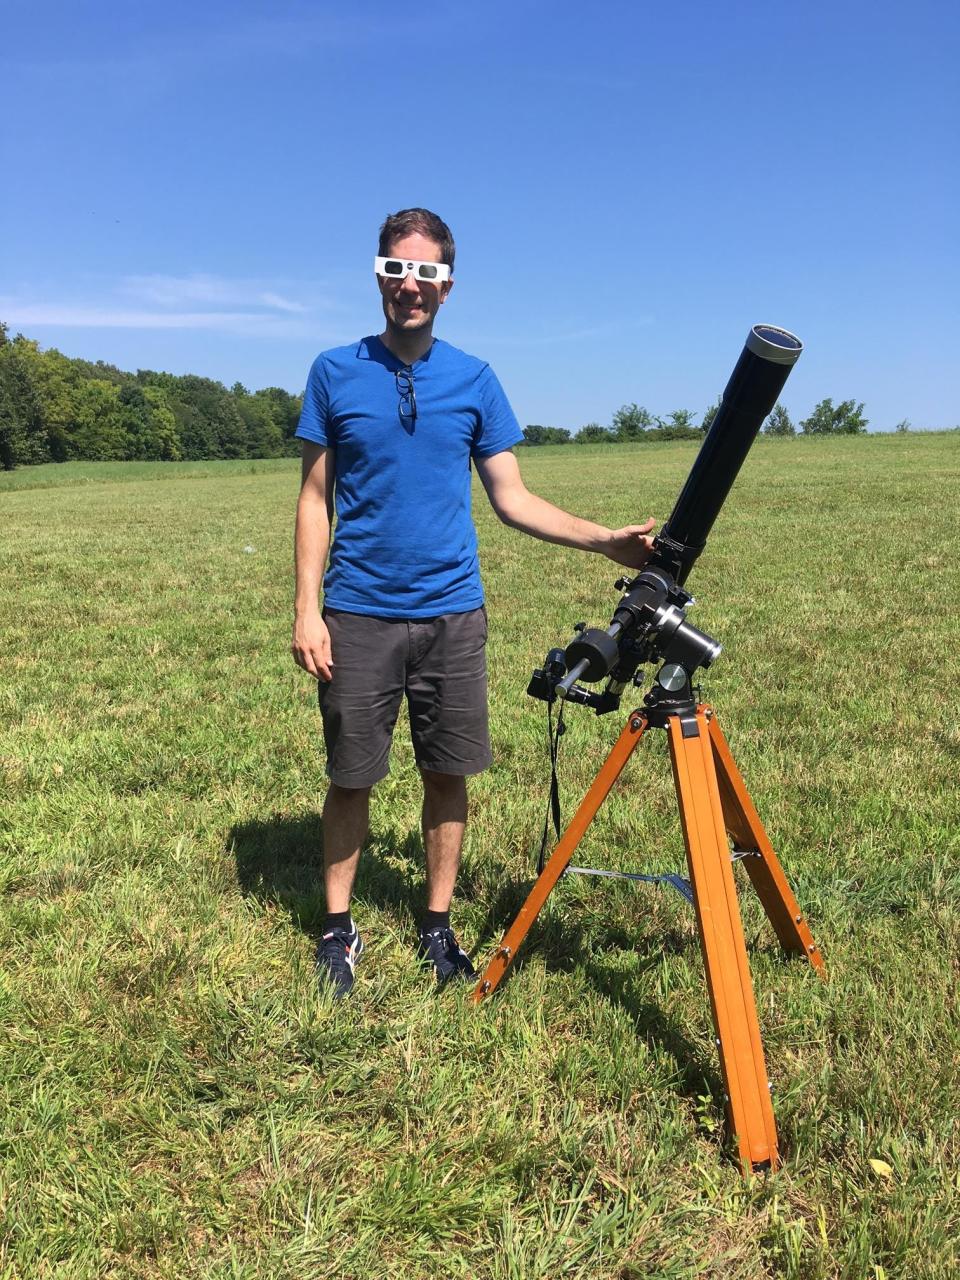 Astronomer Dean Regas has spent 25 years looks at the stars and traveled the world chasing total solar eclipses. He's already getting ready for the April 8 total solar eclipse that will plunge much of Ohio into darkness.